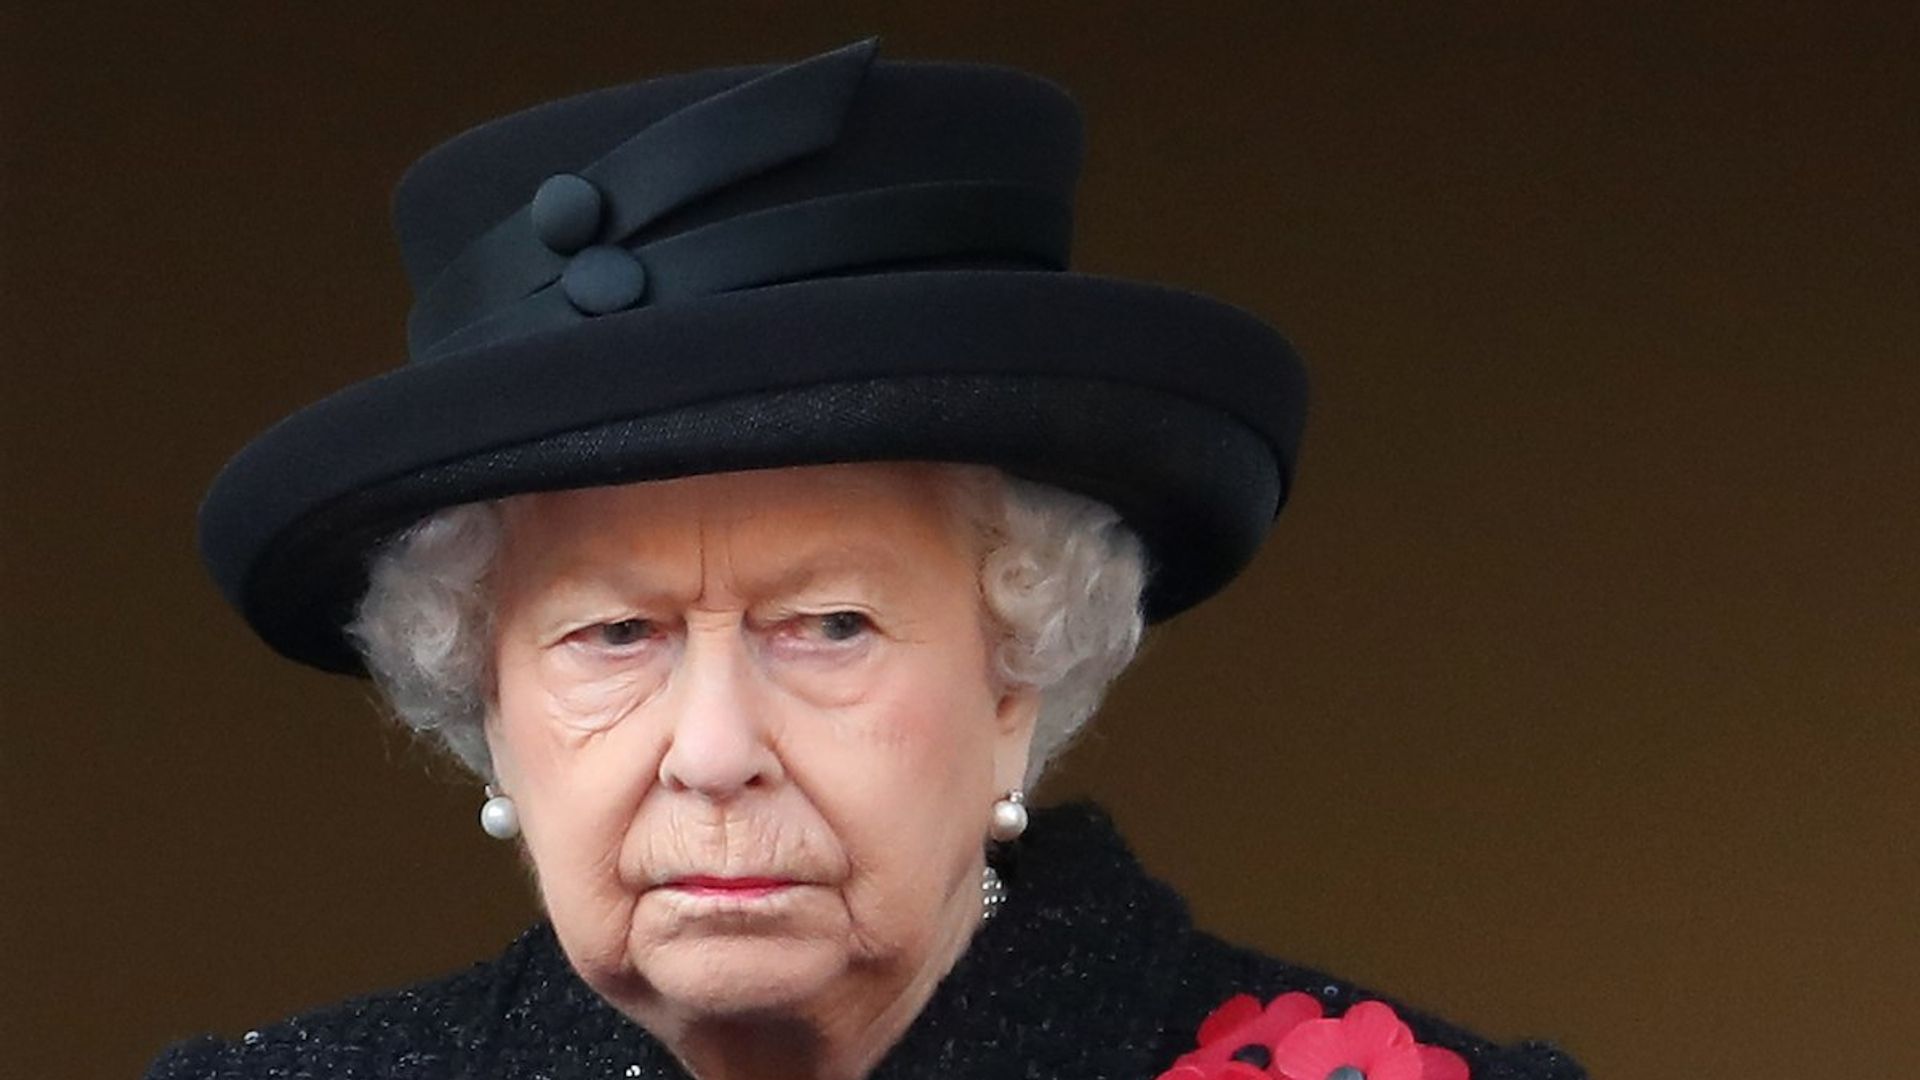 The Queen's rare appearance wearing black in public revealed | HELLO!